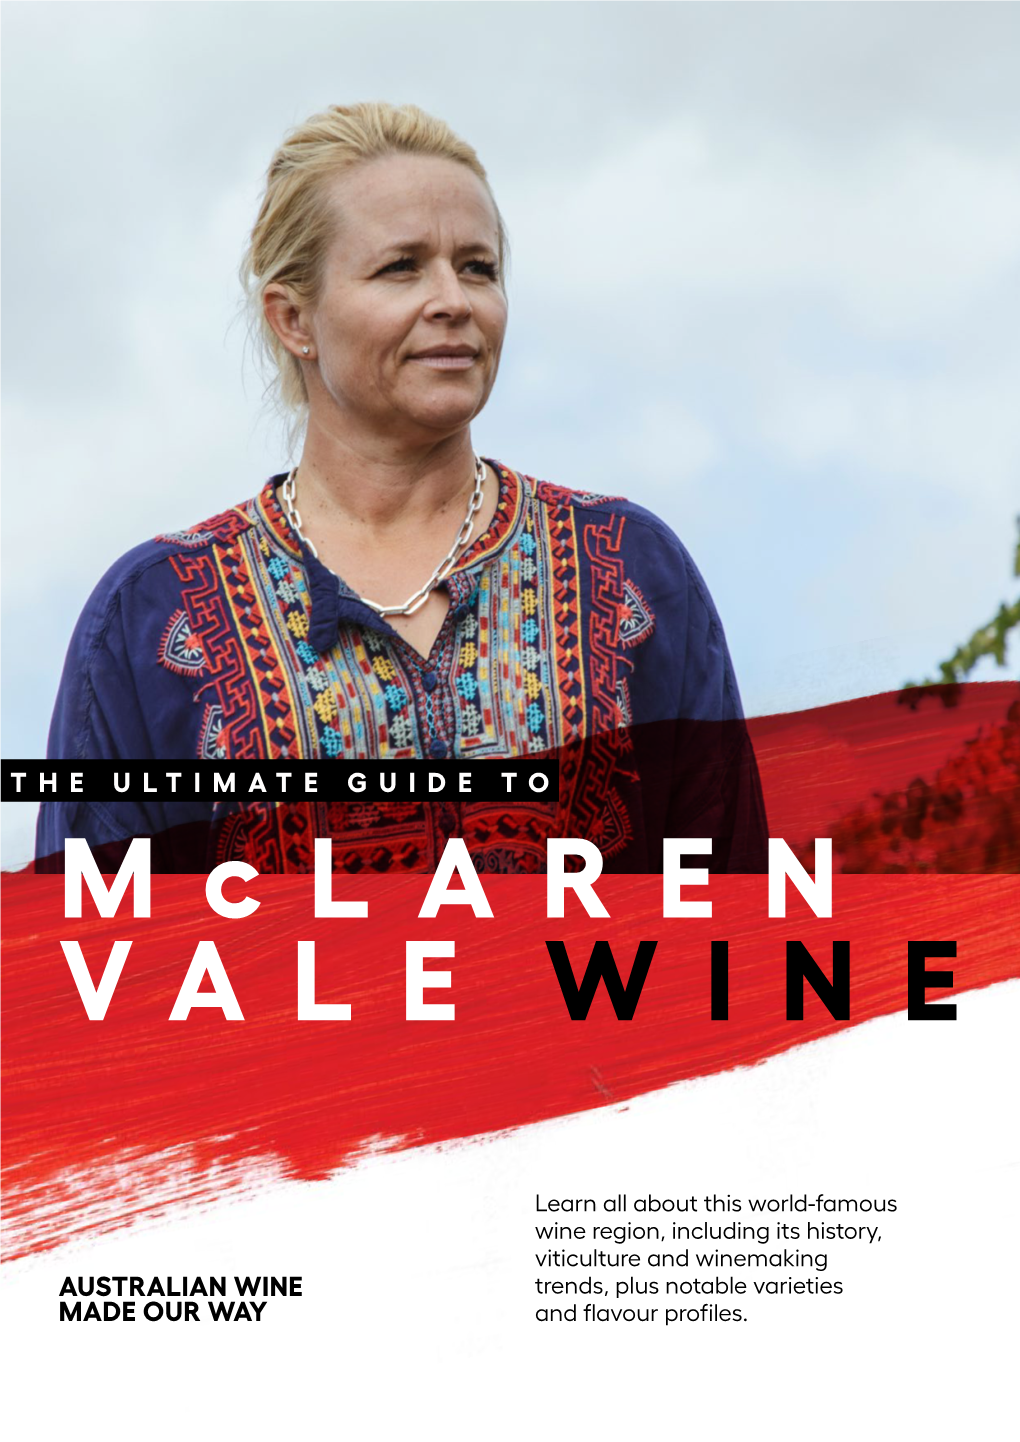 Mclaren Vale Wine Mclaren Vale Is One of the Oldest and Most Historically Significant Wine Regions in Australia